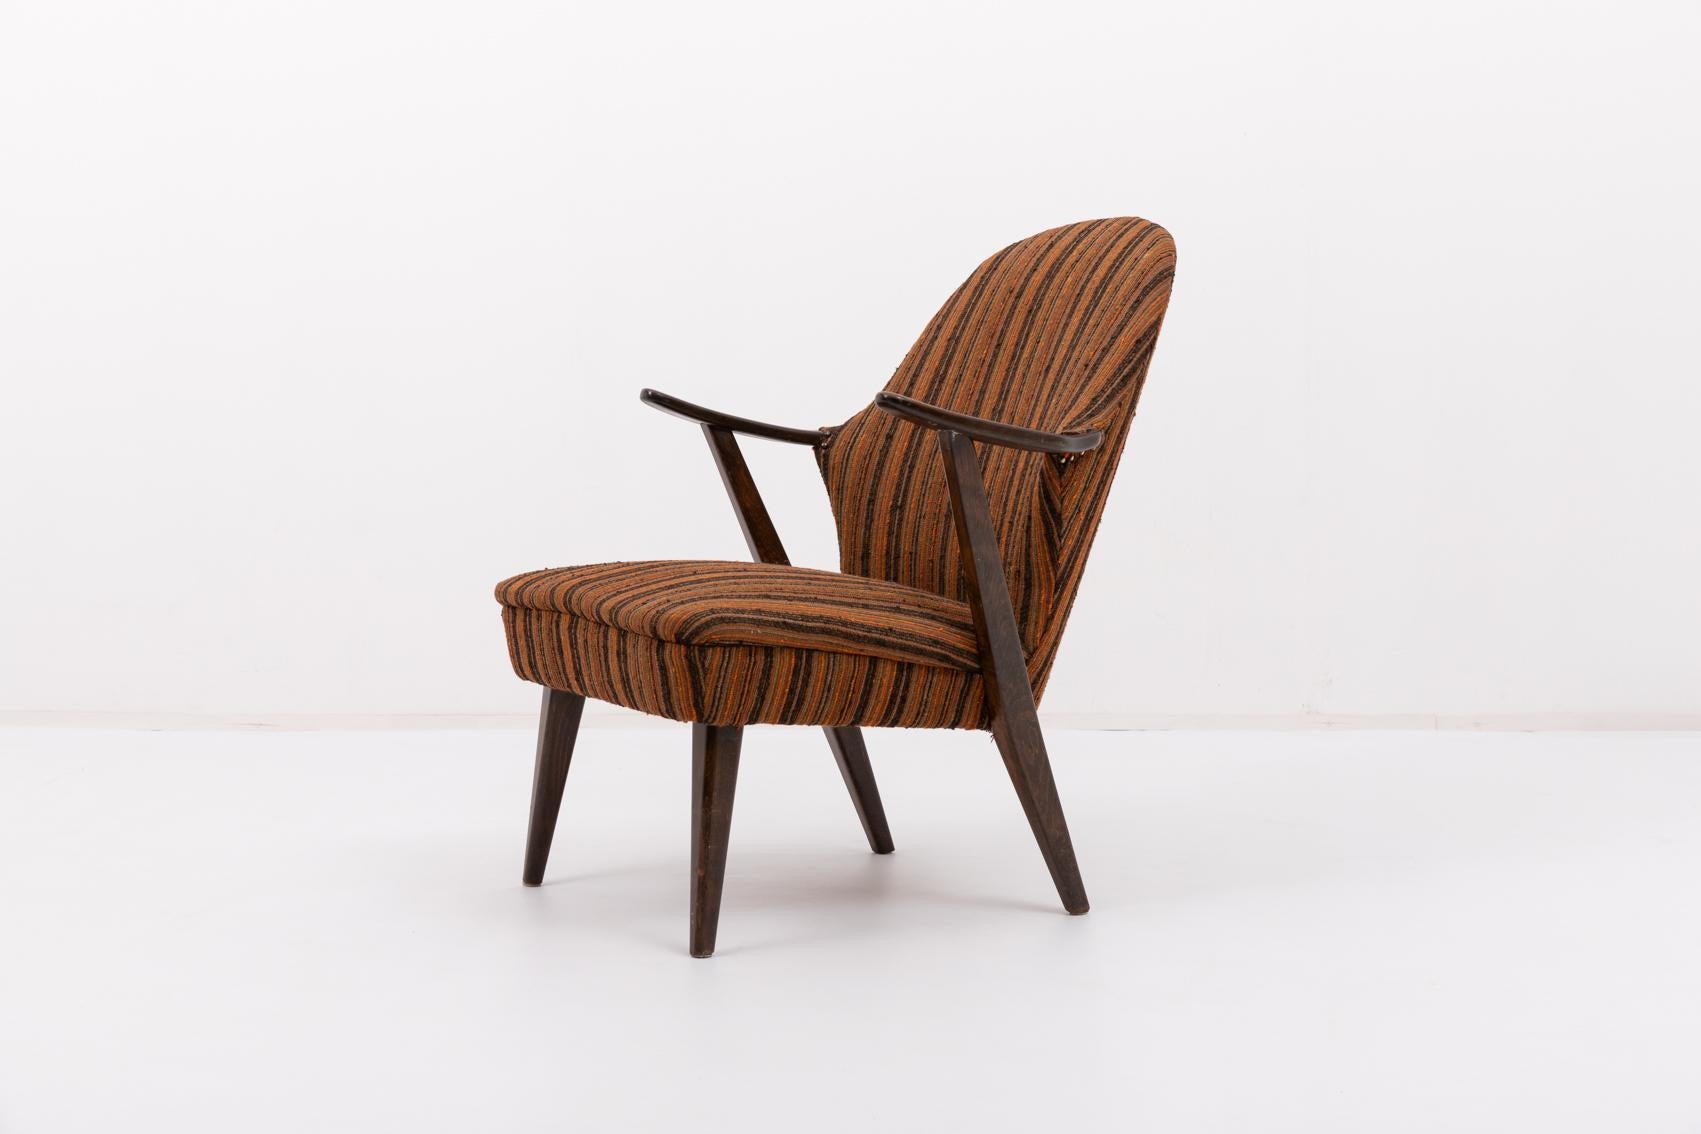 Throughout the 1950’s-70’s Danish designer Arne Hovmand Olsen created furnishings that boasted all of the alluring qualities now associated with vintage Scandinavian modern design. This slender frame and sculptural seat back chair has original brown